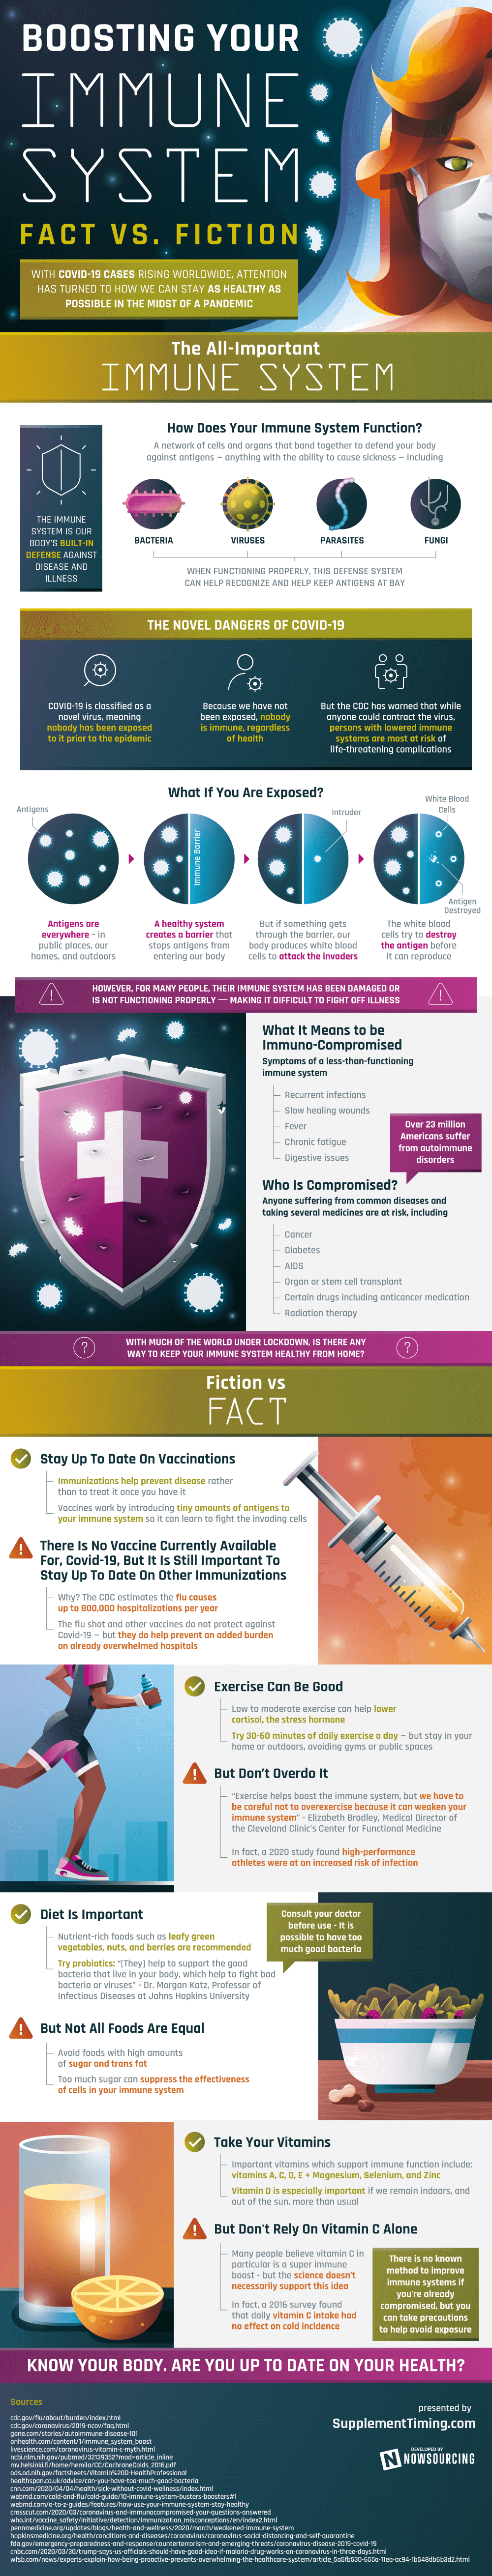 Boosting Your Immune System: FACT VS. FICTION Infographic